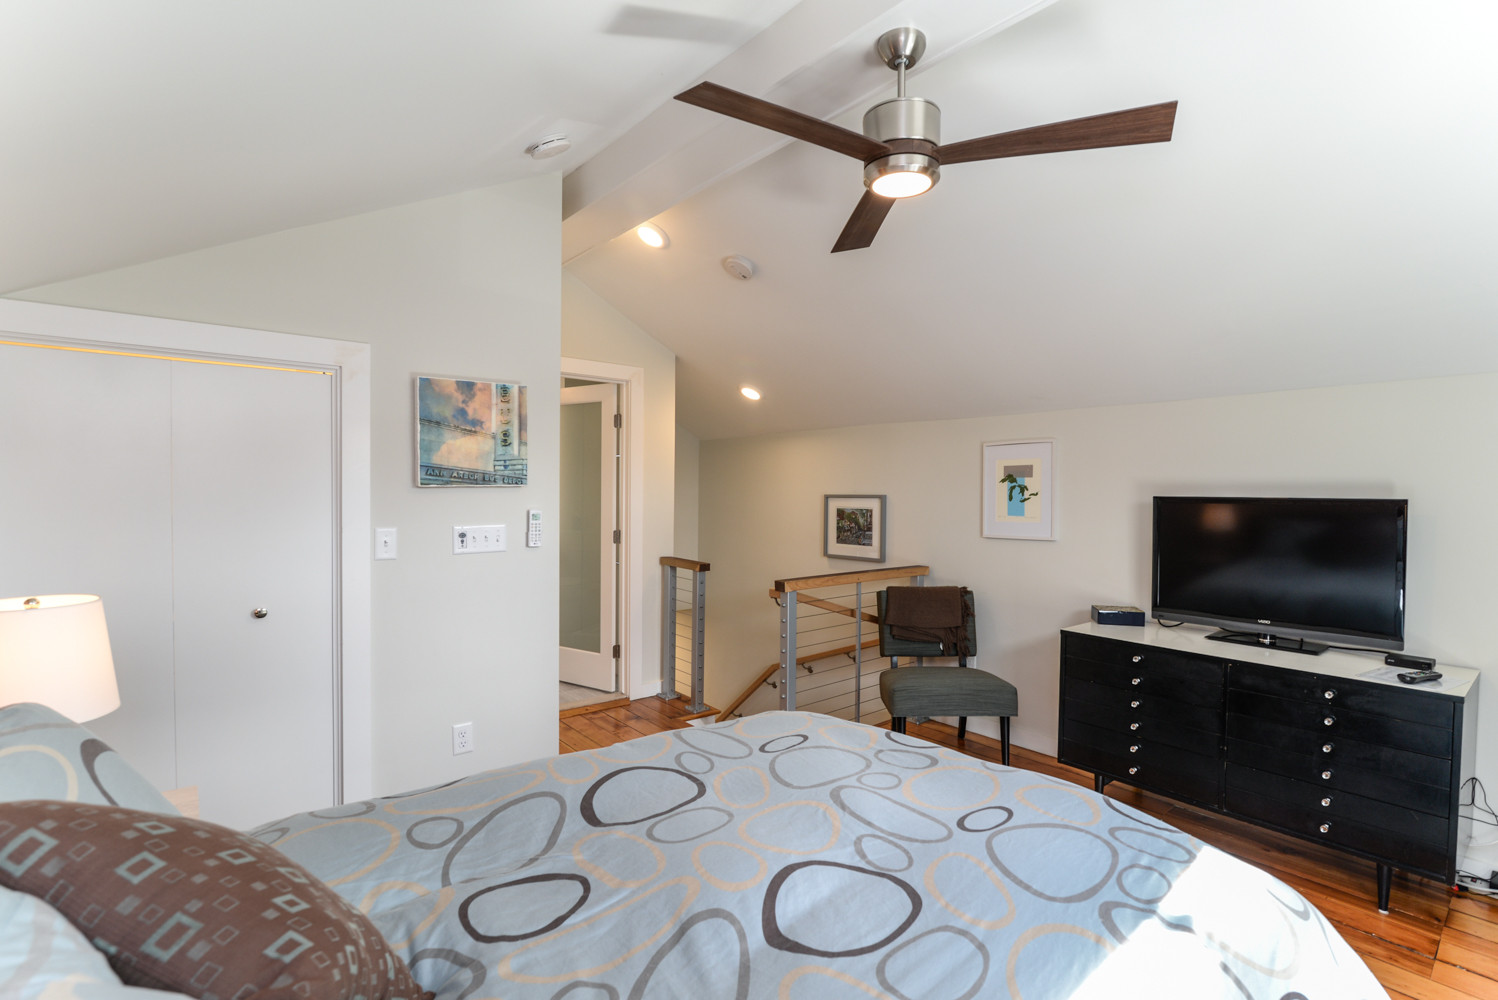 The staircase leads directly to the master bedroom area, with an attached bathroom shown in the background. Although smaller in scale, the overall feel is open and airy with plenty of storage in the u